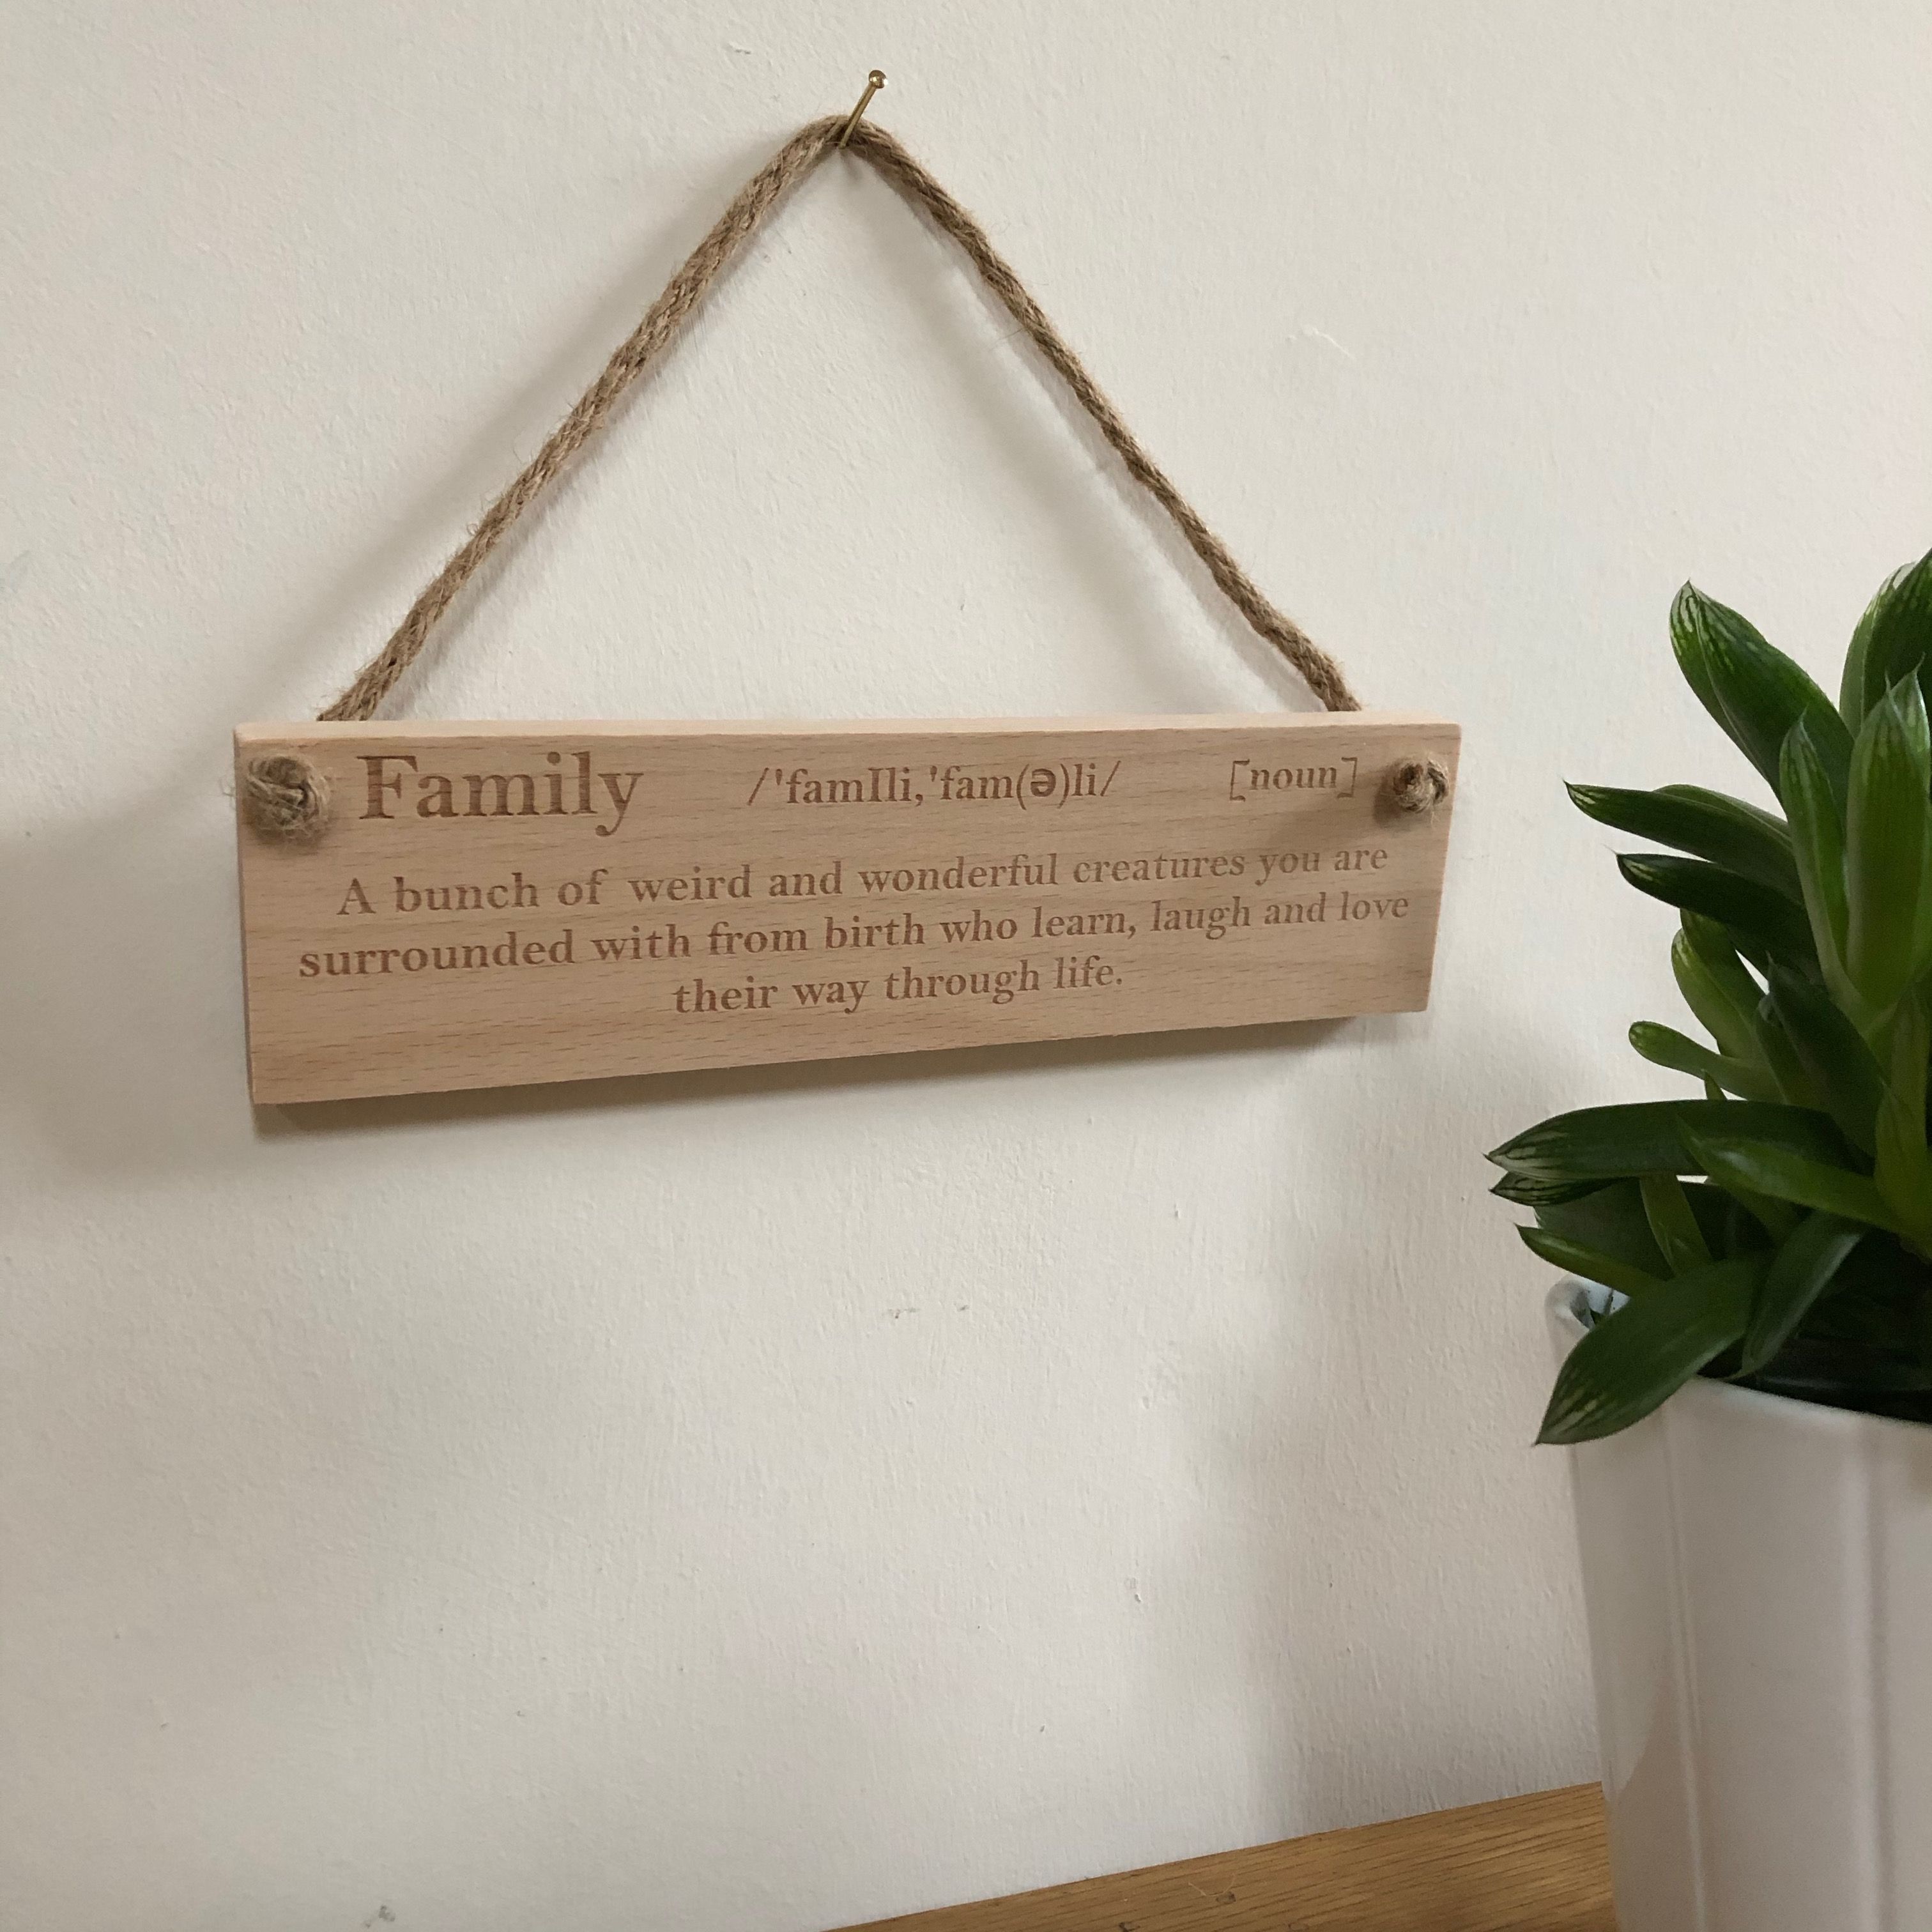 Wooden hanging plaques